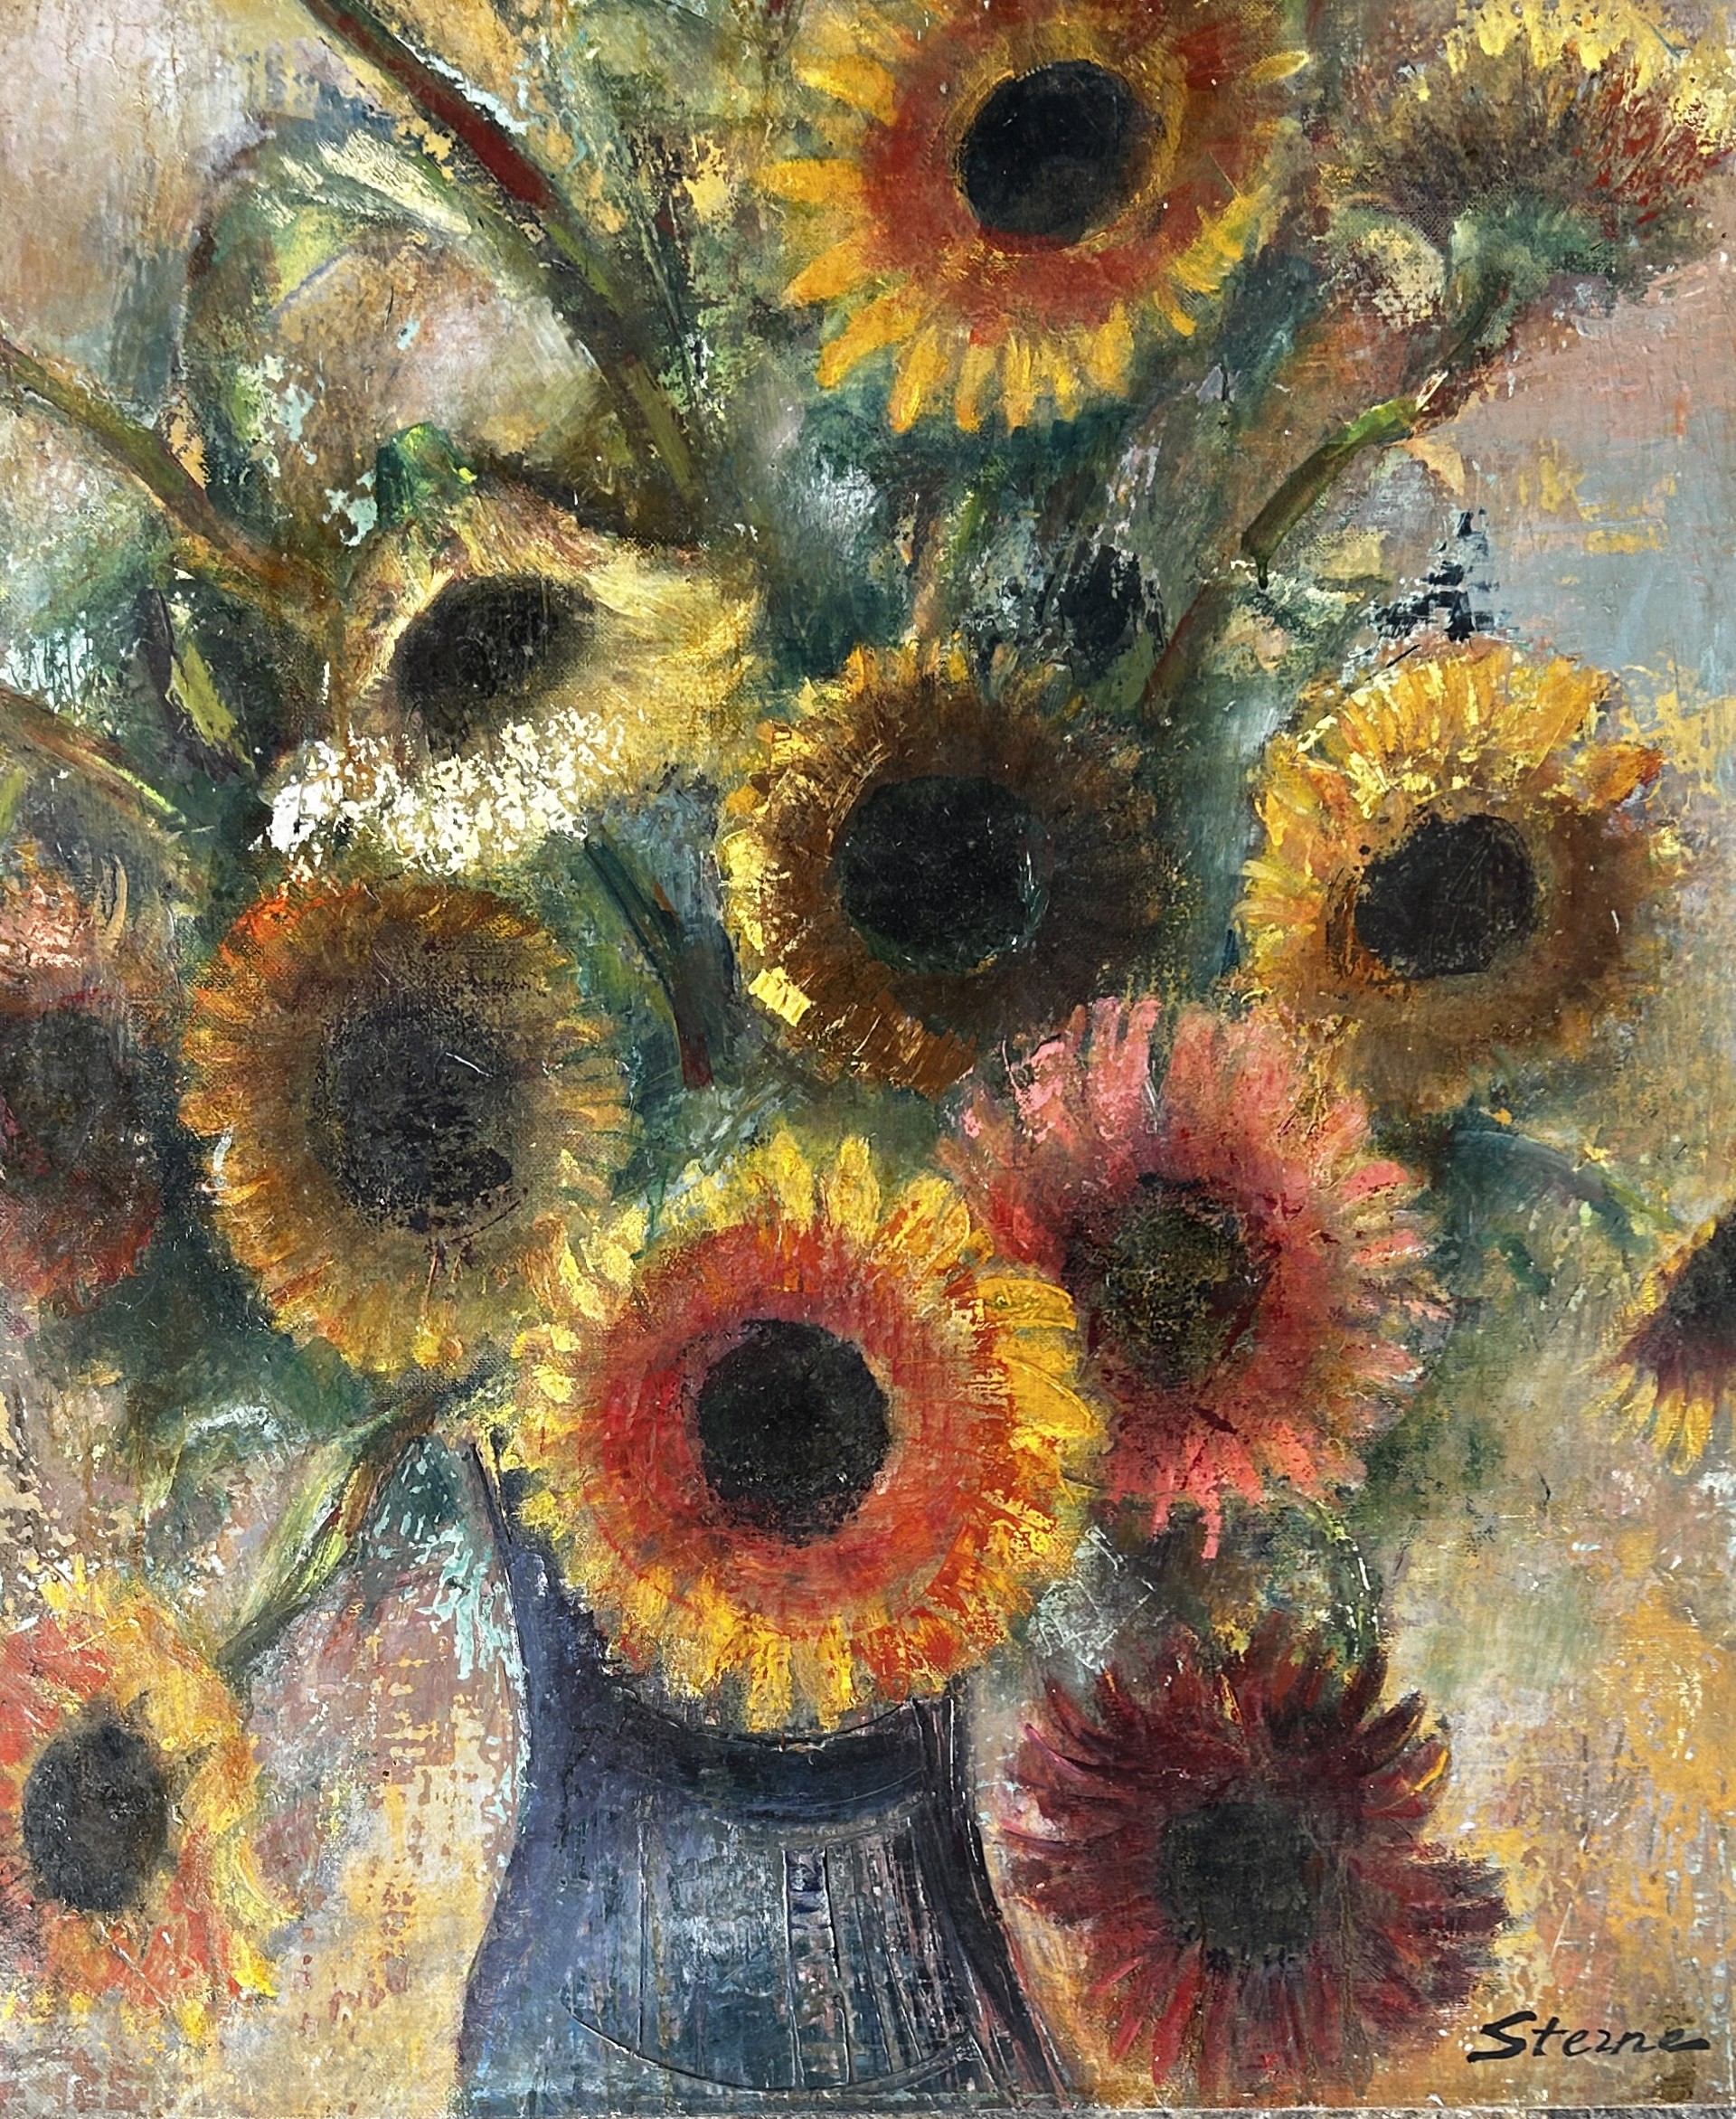 Sunflowers by Maurice Sterne